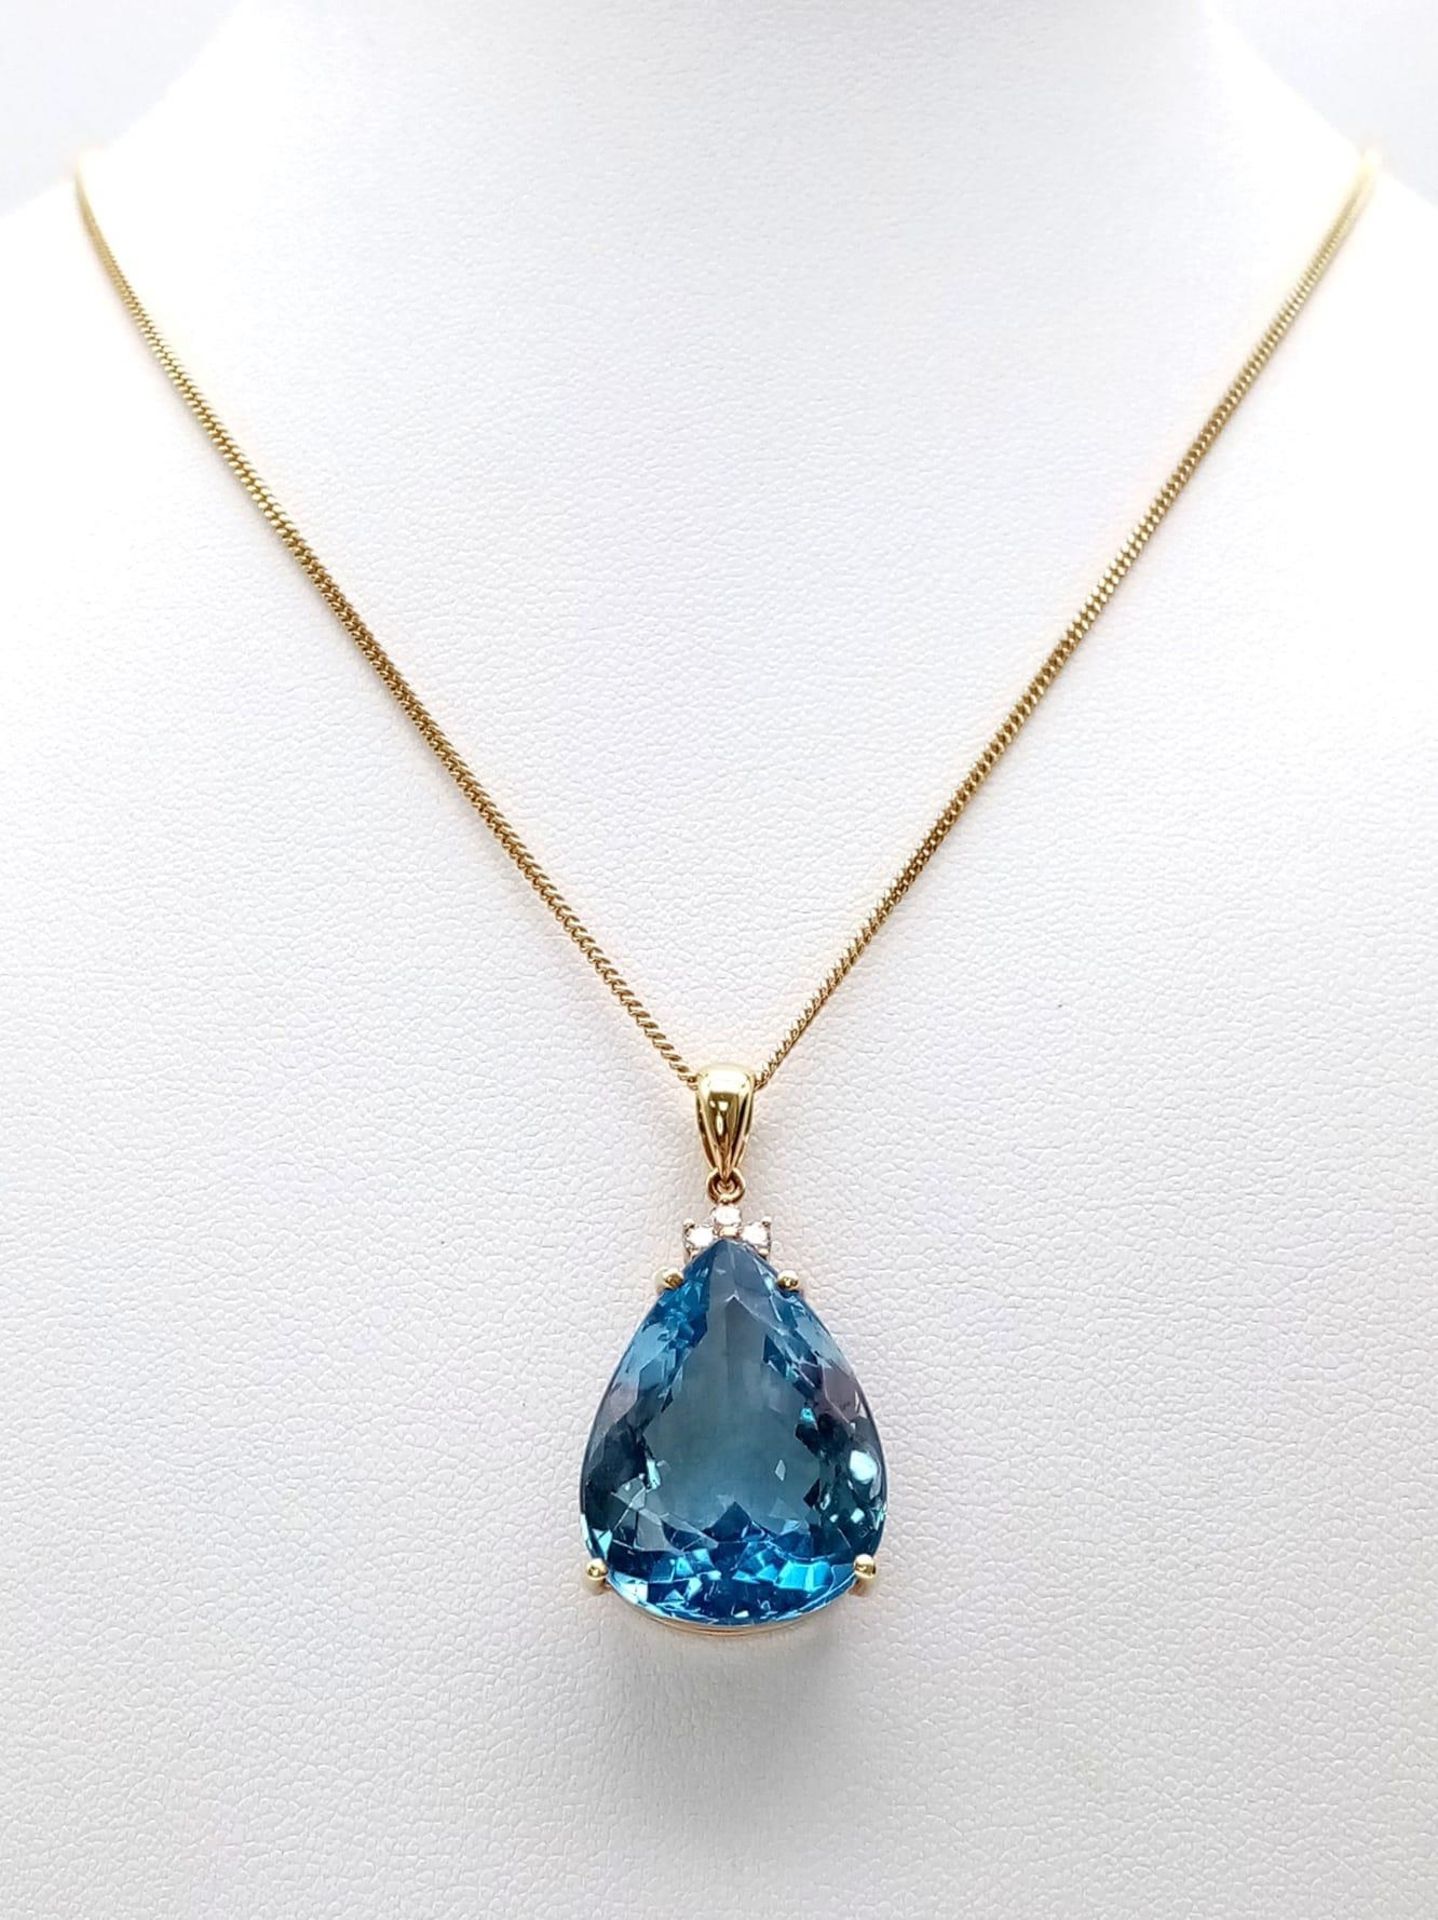 A Captivating 29ct Brazilian Blue Topaz, Diamond and 18K Gold Pendant - On an 18K Yellow Gold - Image 4 of 13